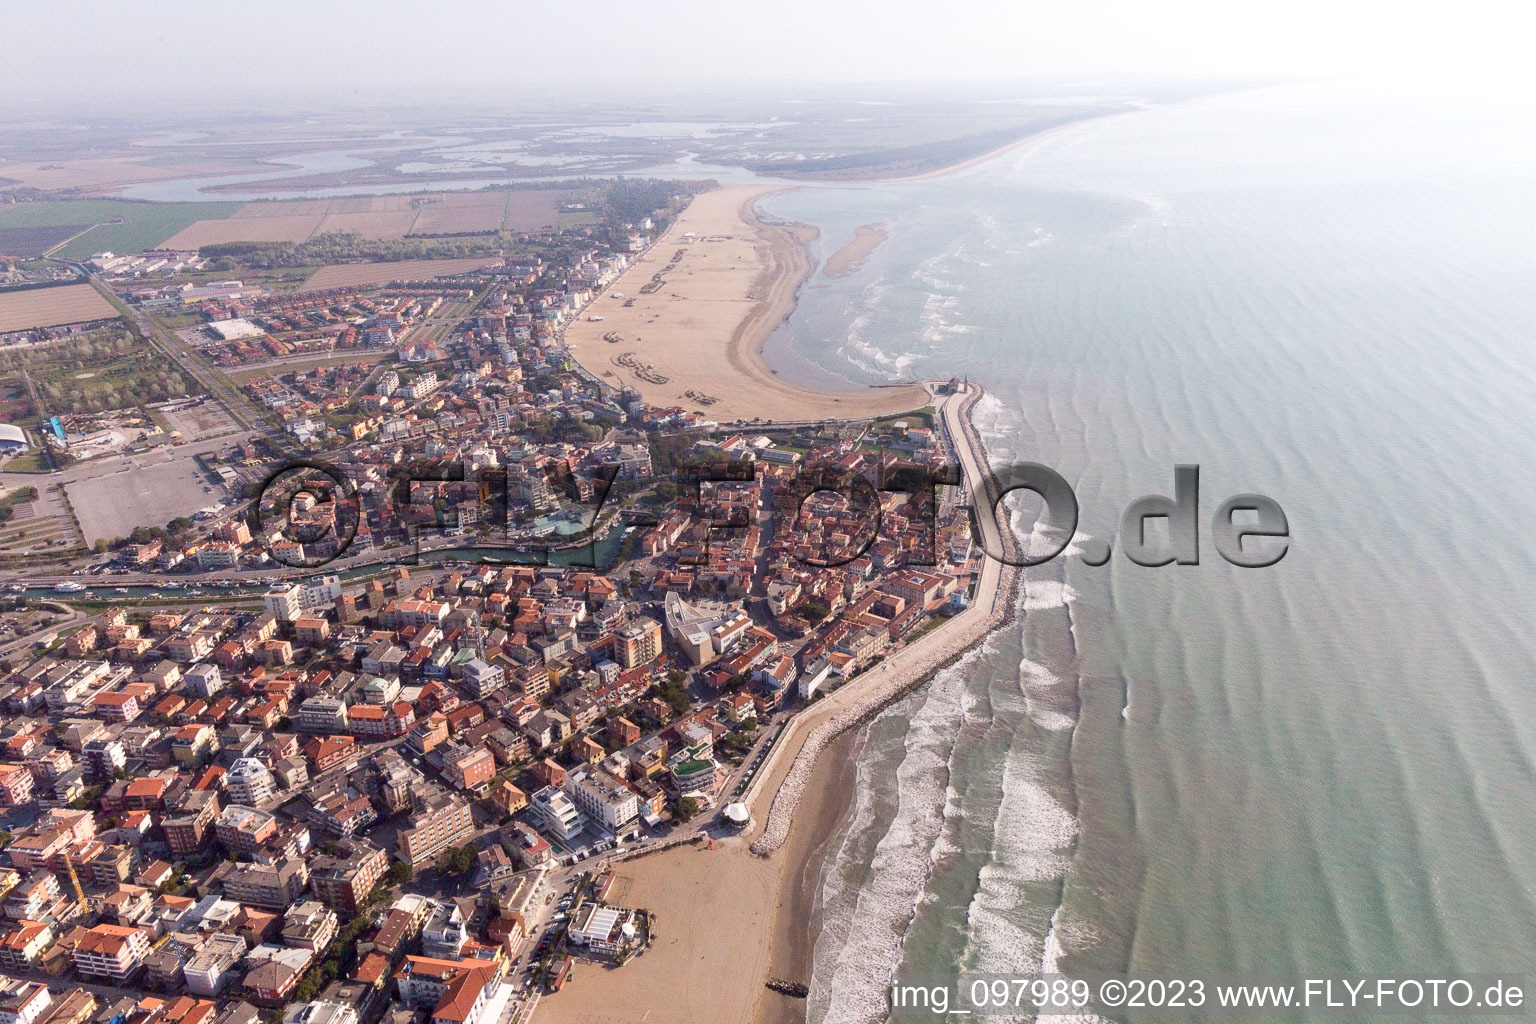 Caorle in the state Veneto, Italy seen from above